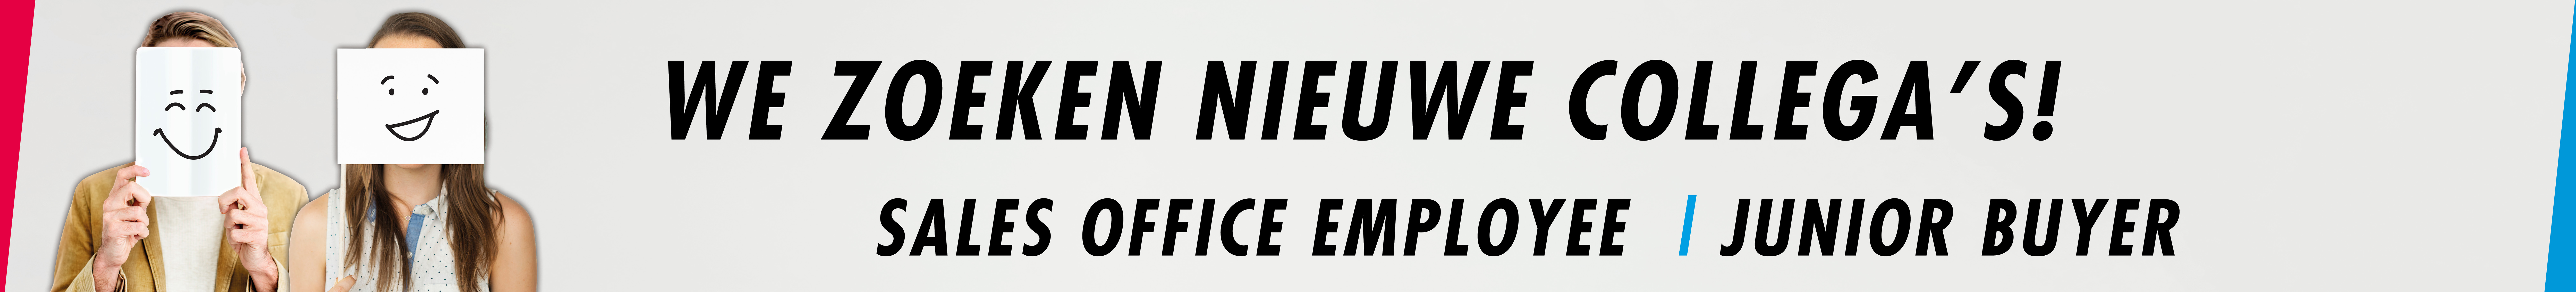 Vacature Sales Office Employee